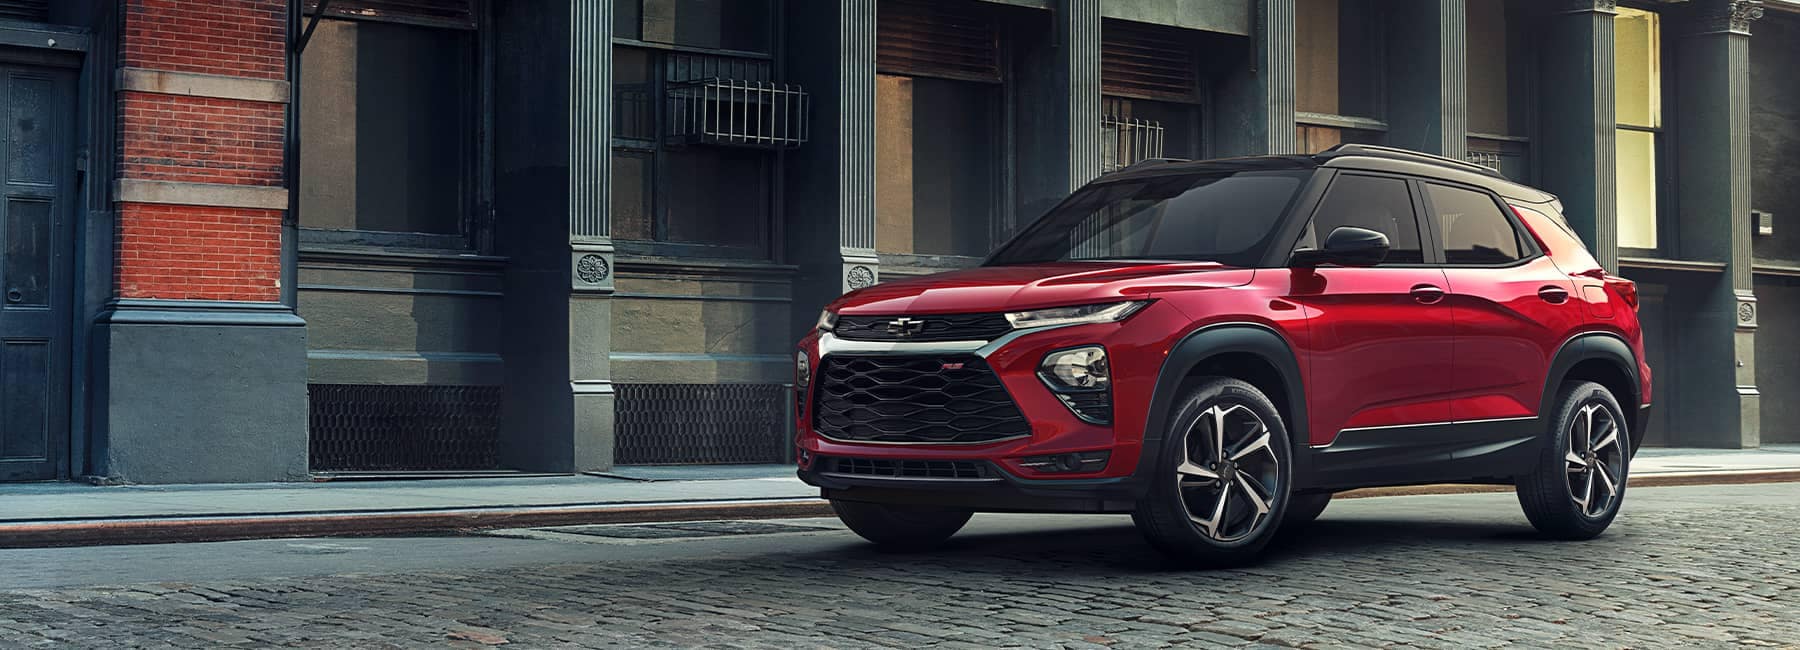 2021 Chevrolet Trailblazer parked in front of a city building_mobile